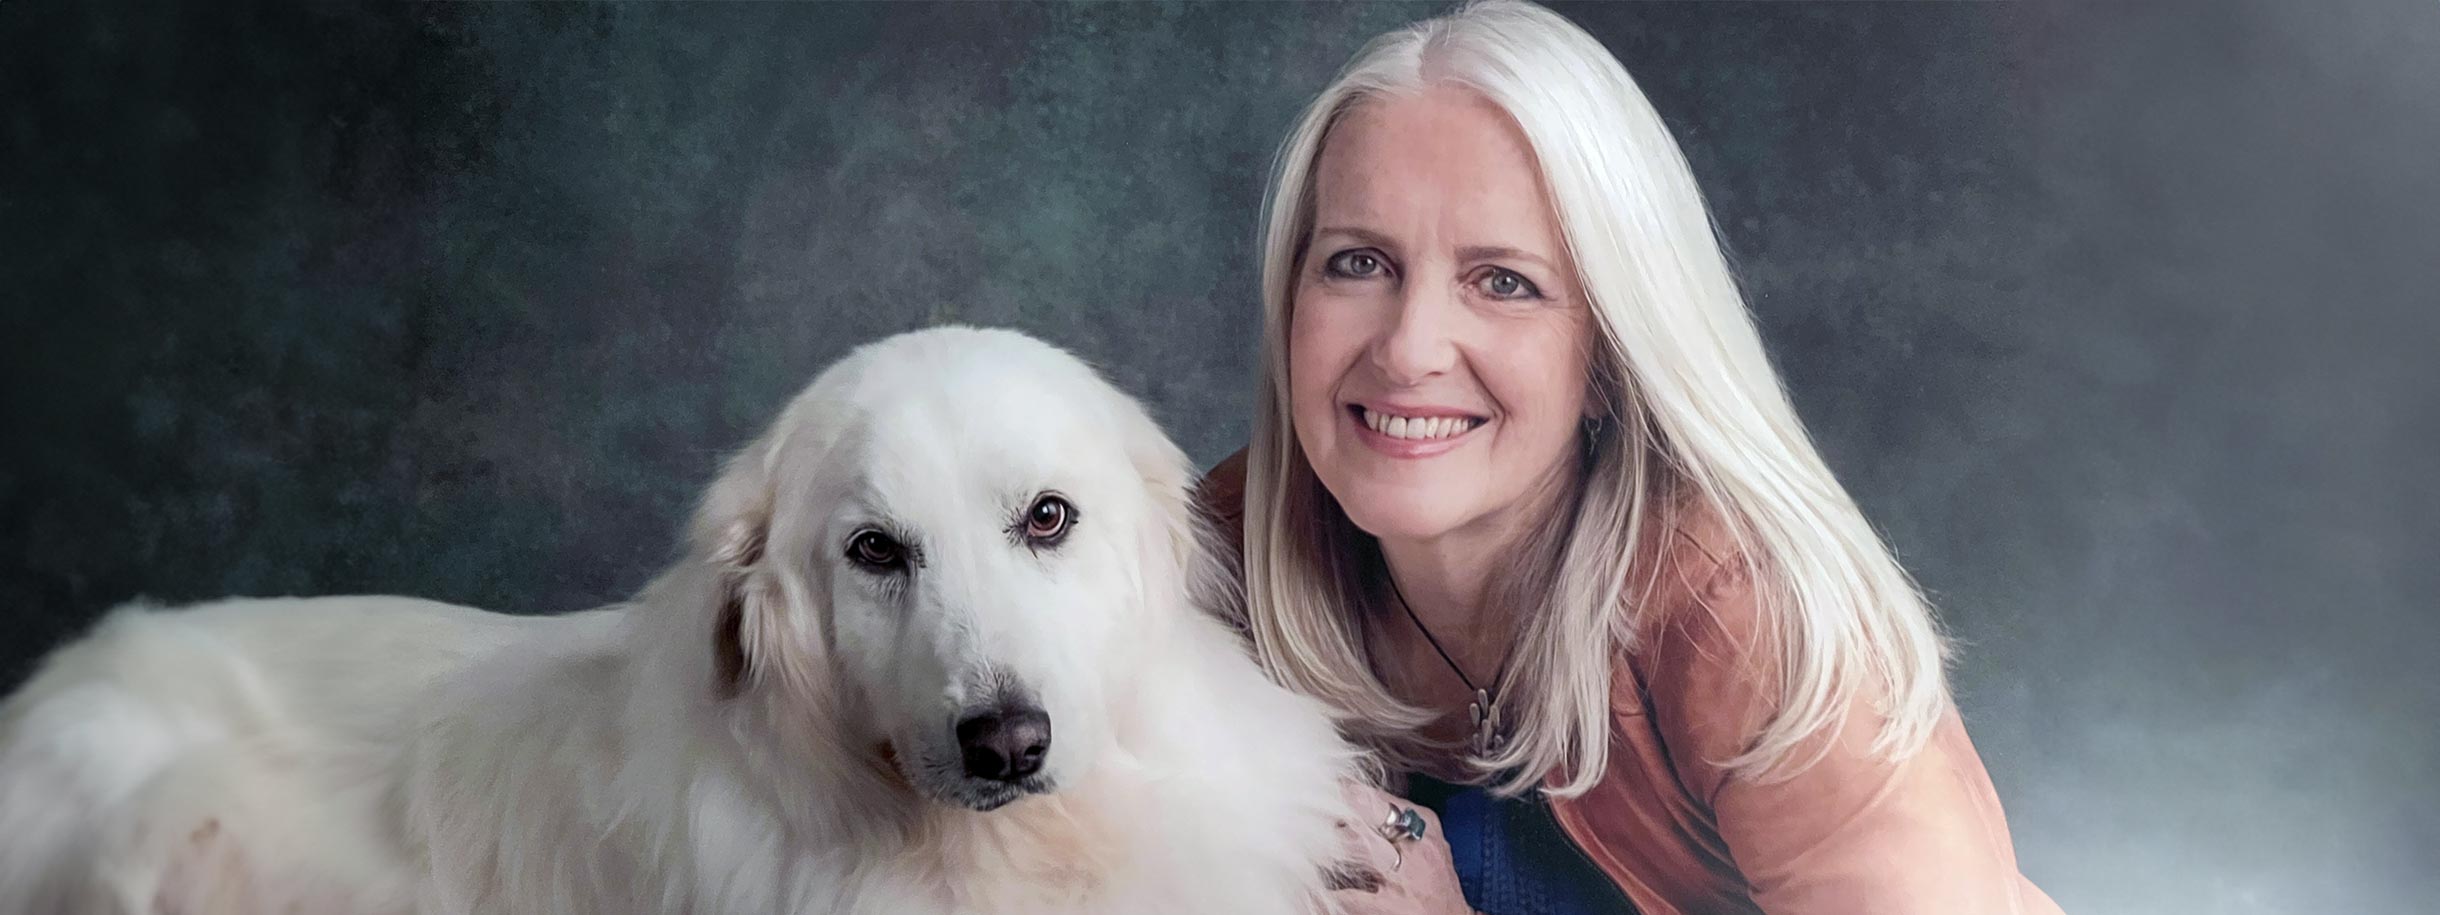 Dr Royal and her white dog